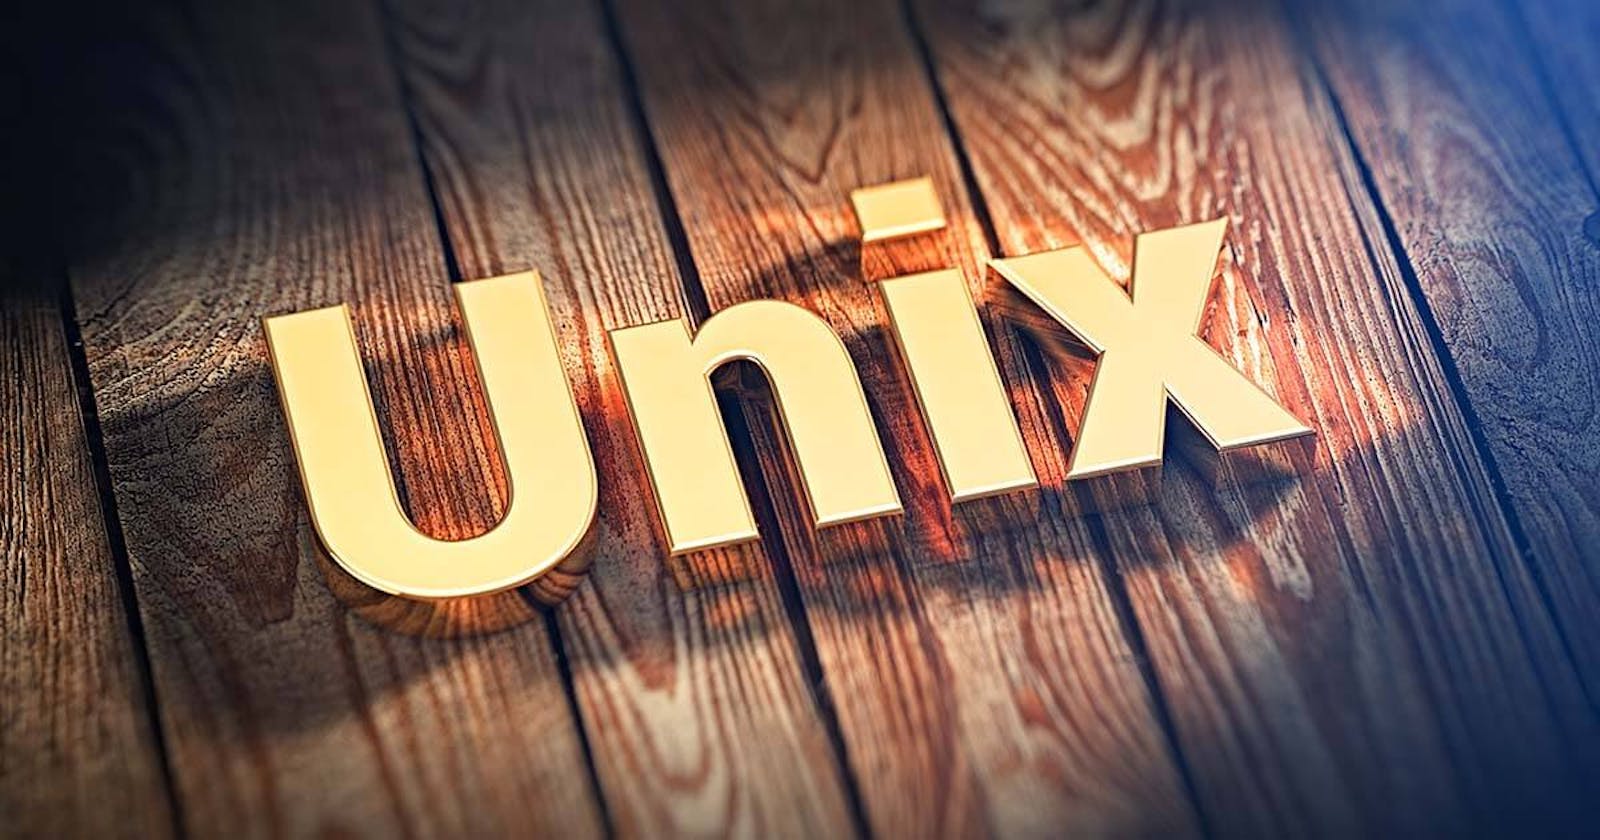 Unix, BSD, Minix, Linux - What, Who and When